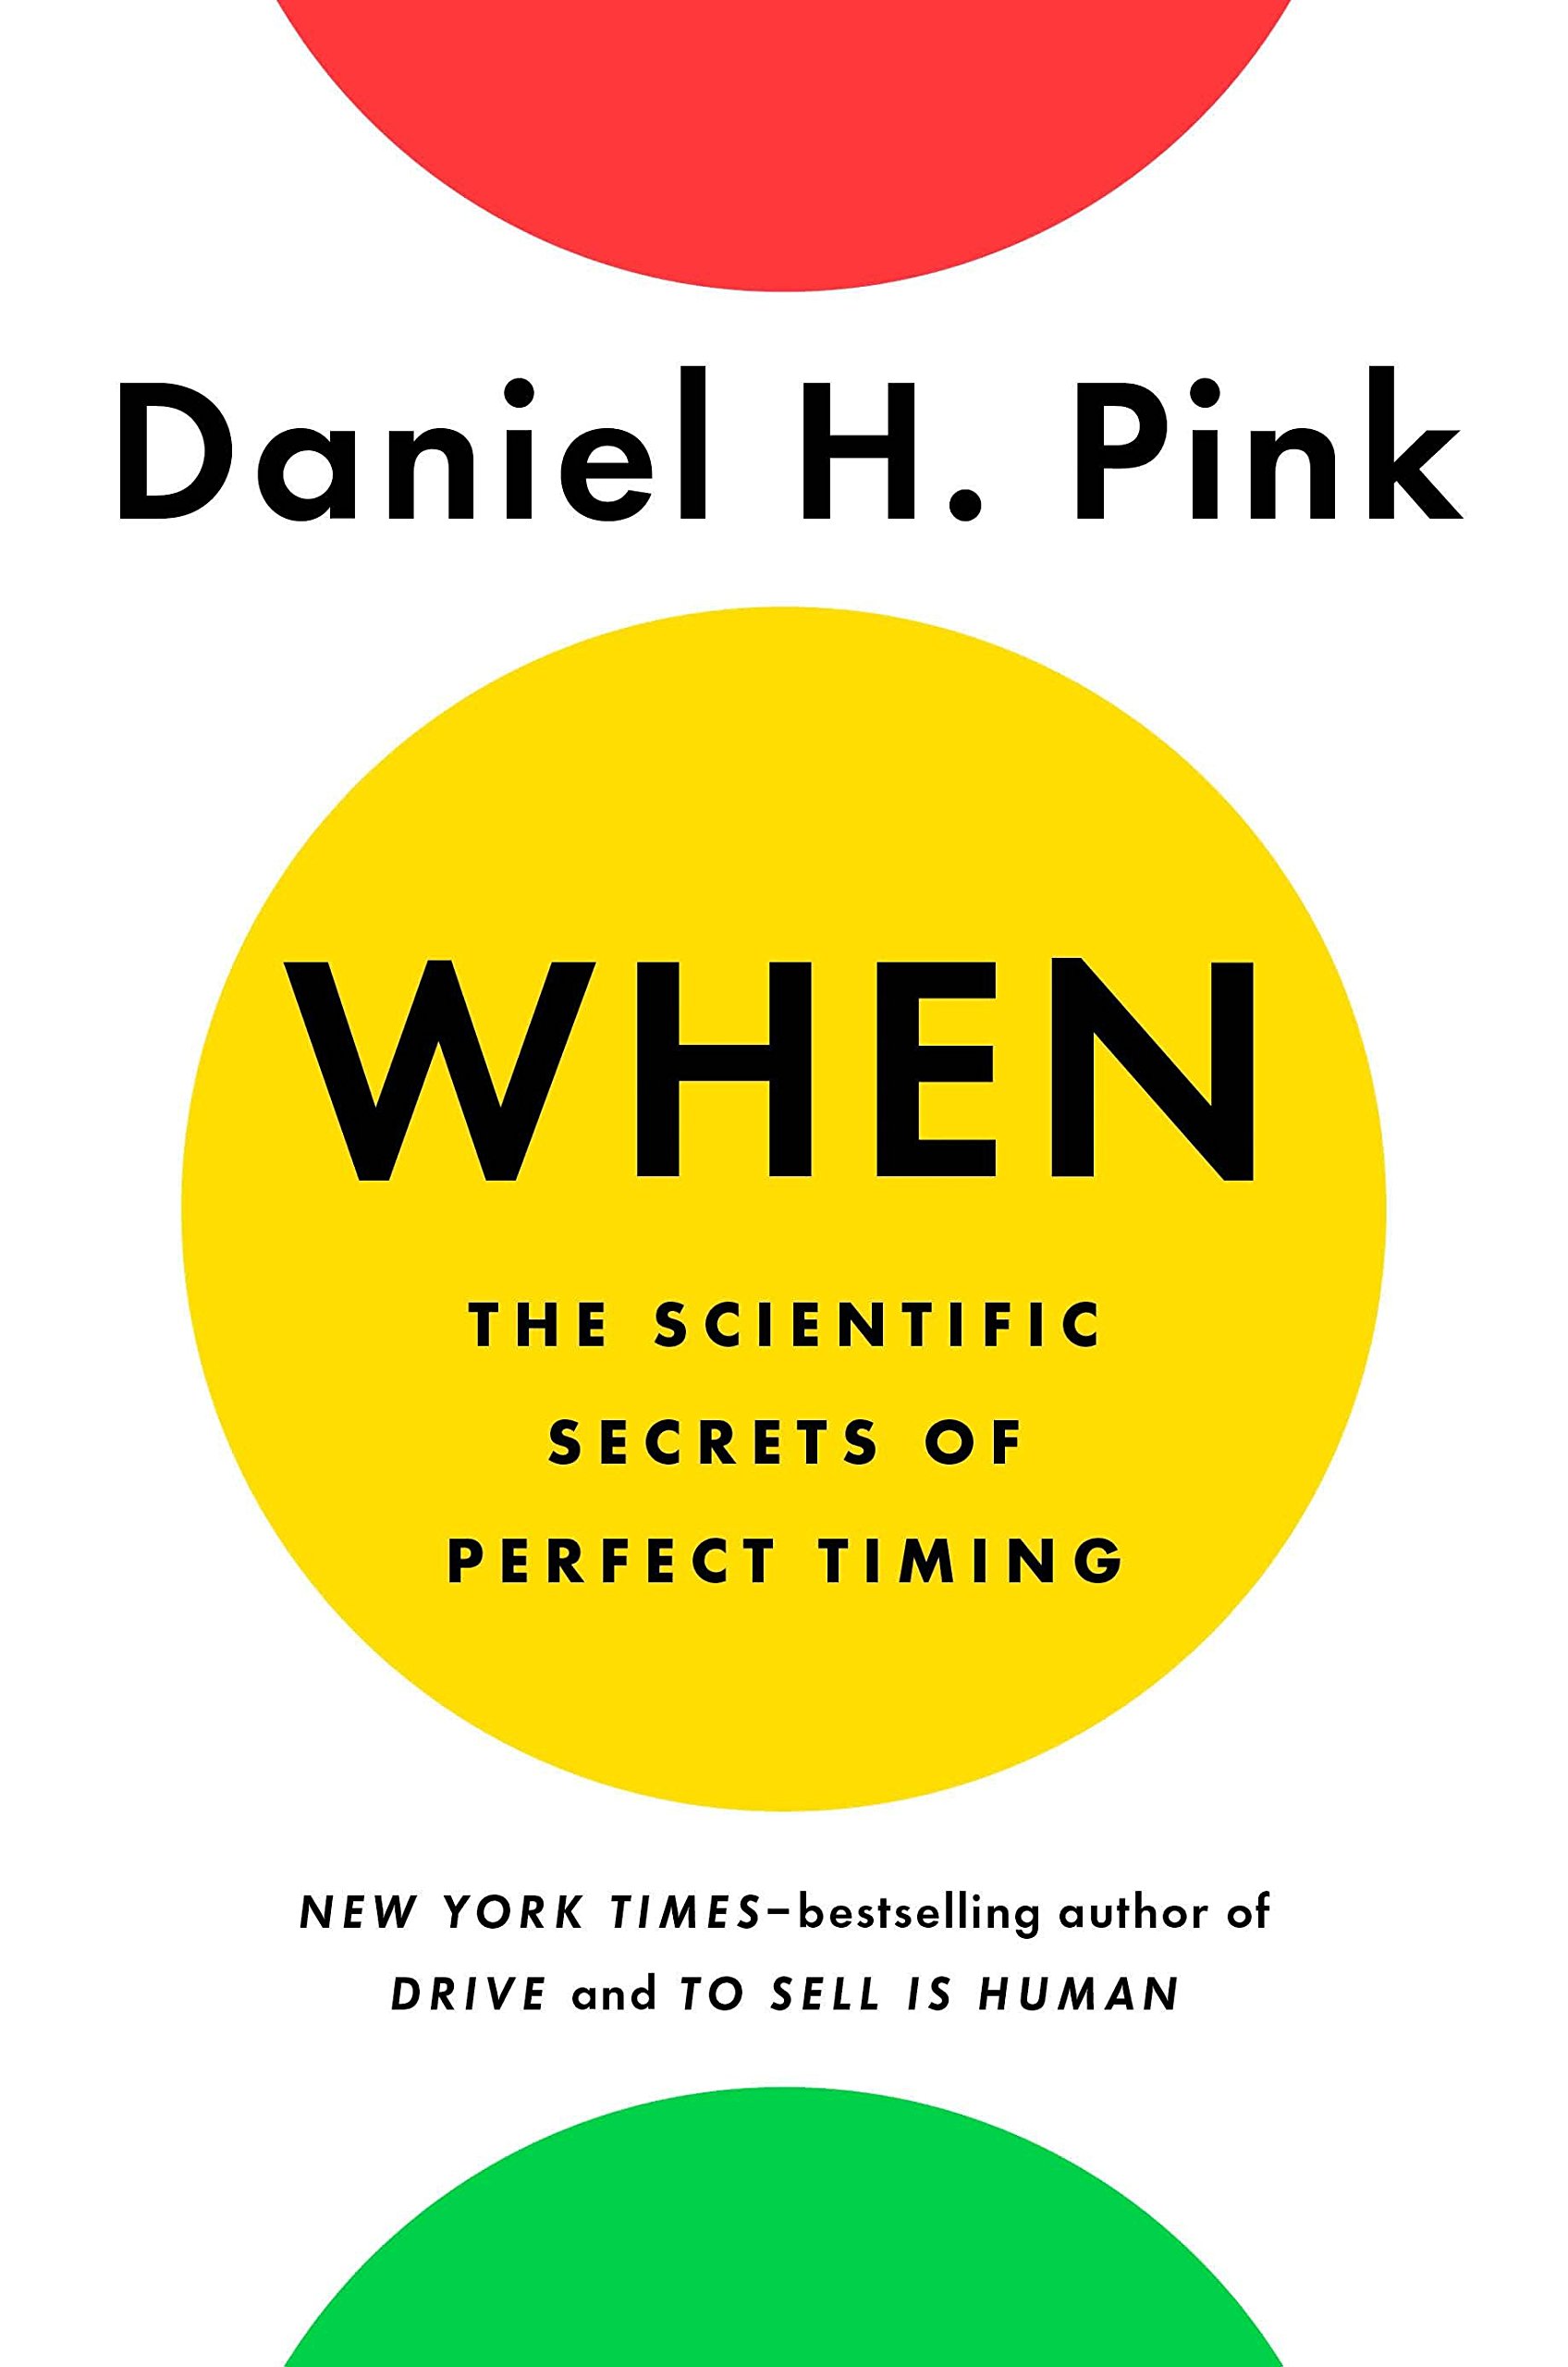 when the scientific secrets of perfect timing by daniel h. pink